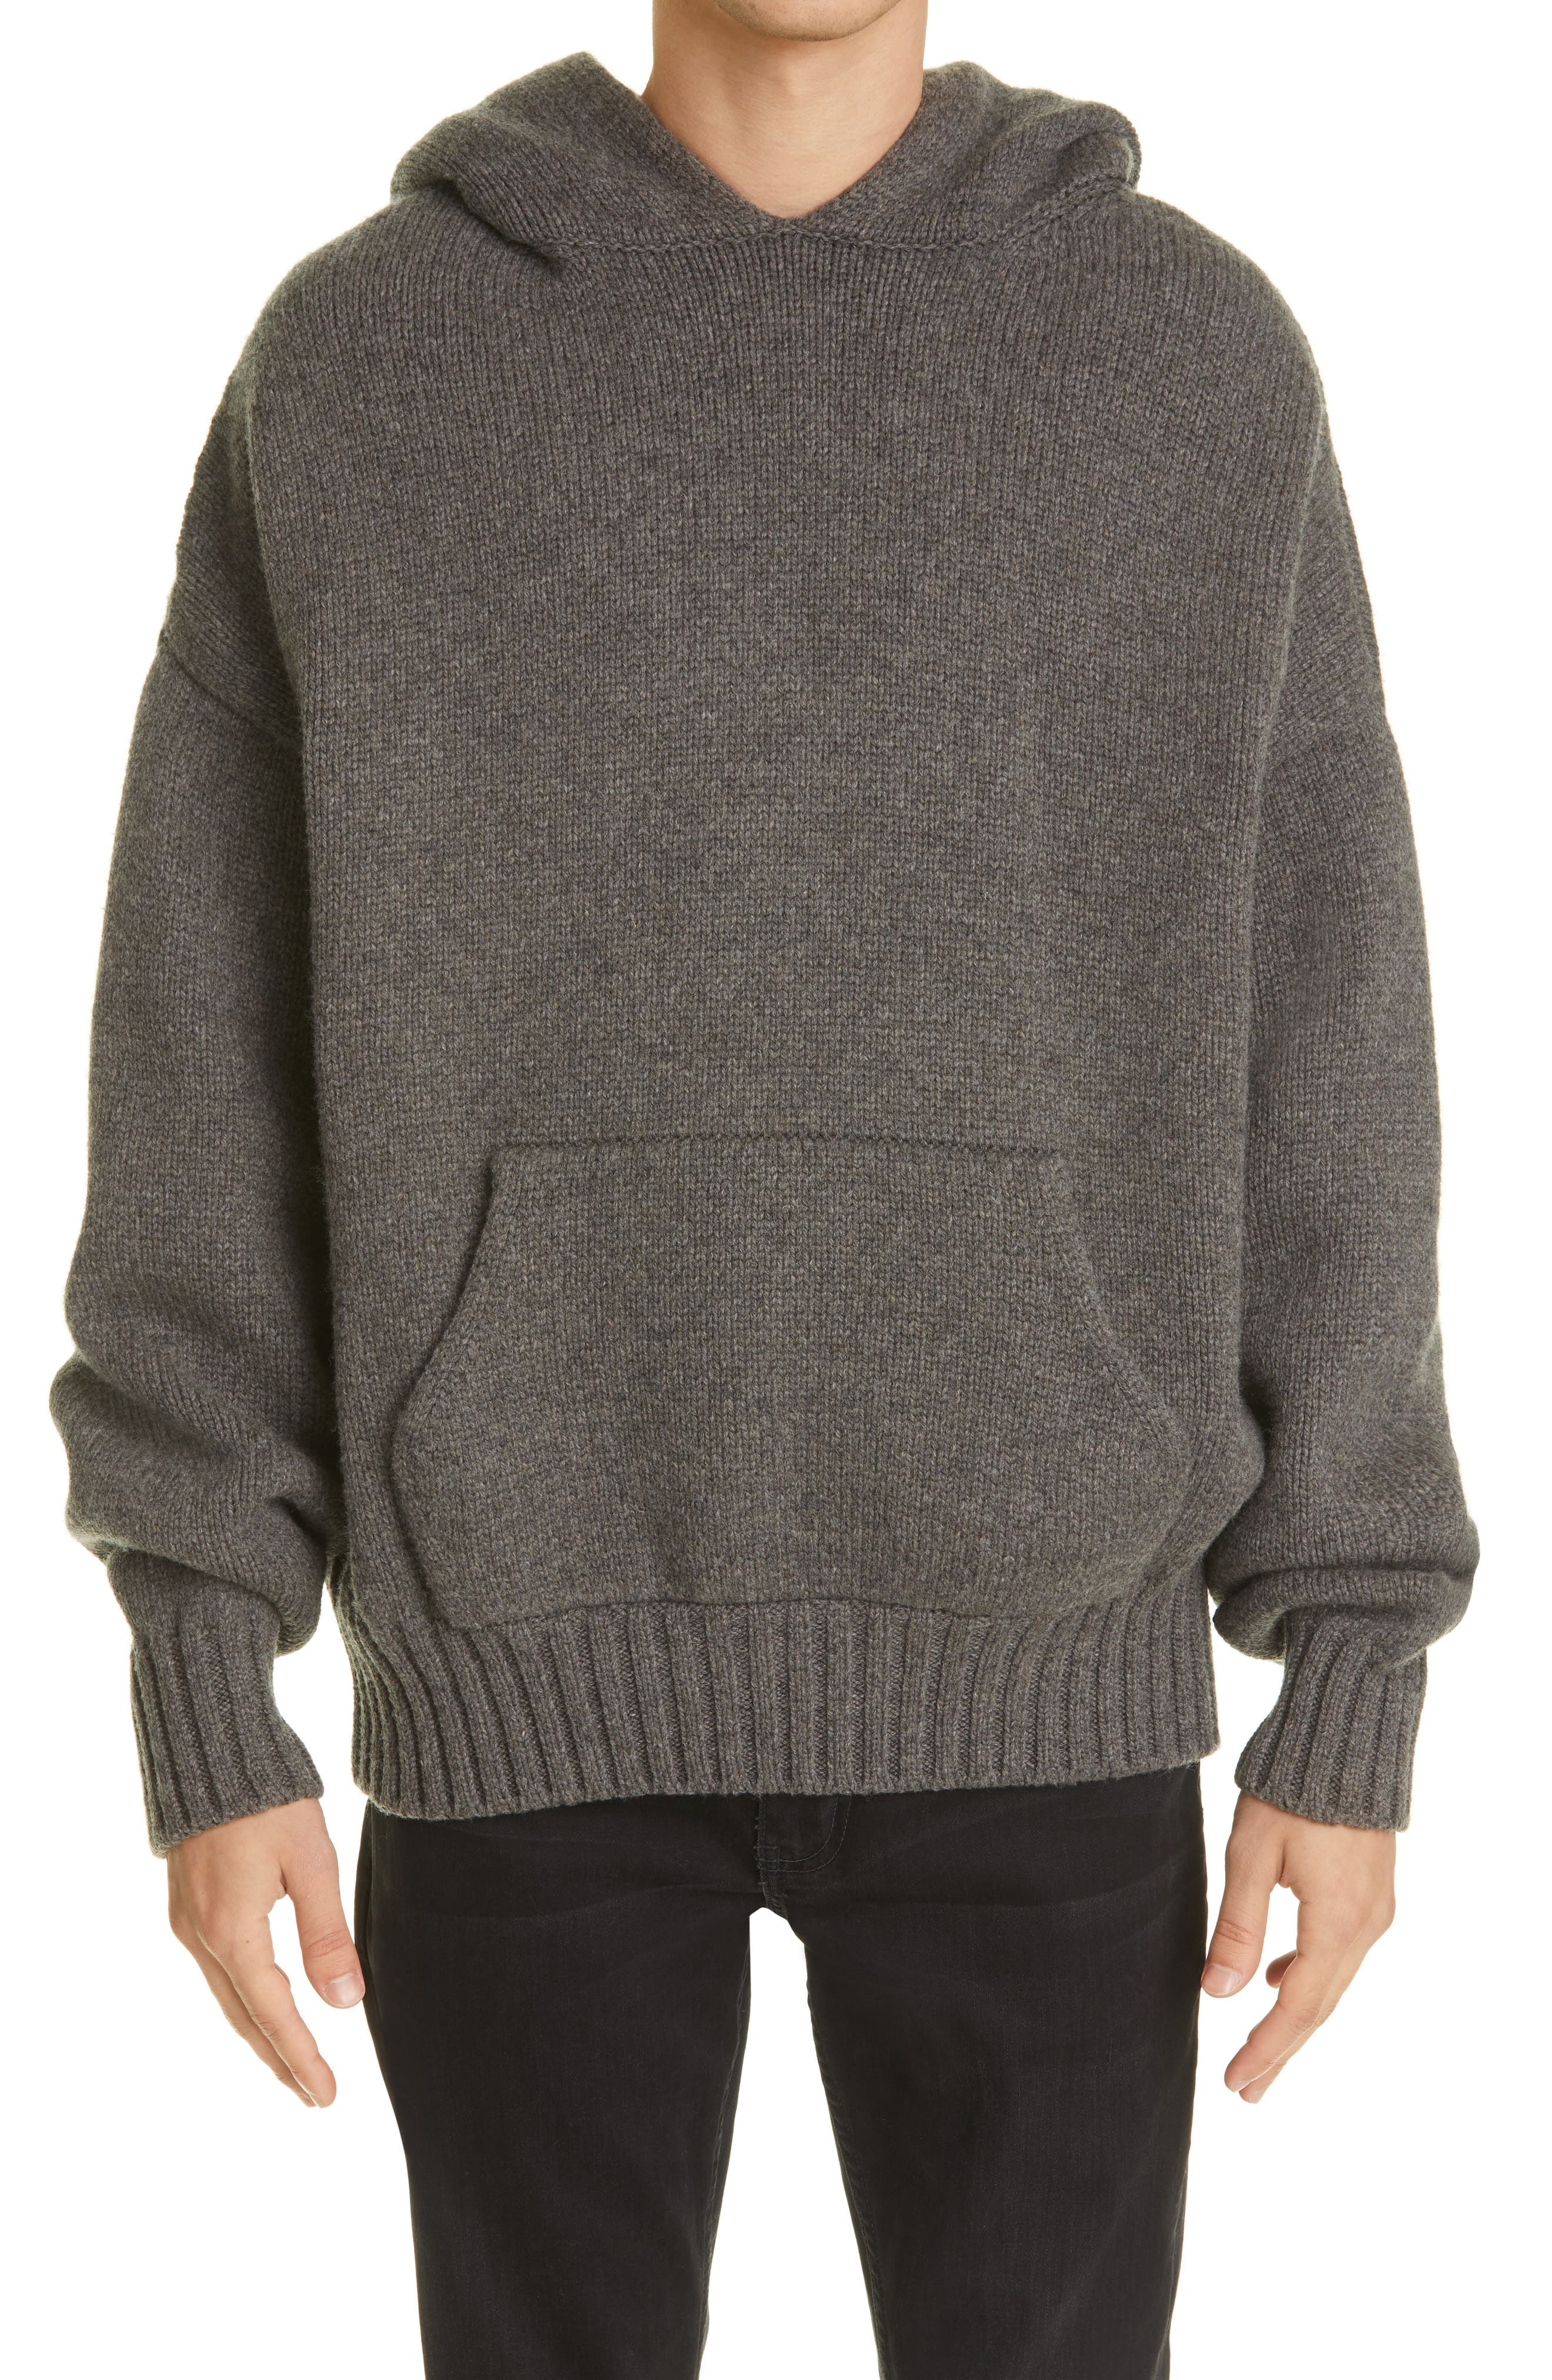 Fear of God Wool Sweater Hoodie in Dark Heather Grey at Nordstrom, Size Small Us